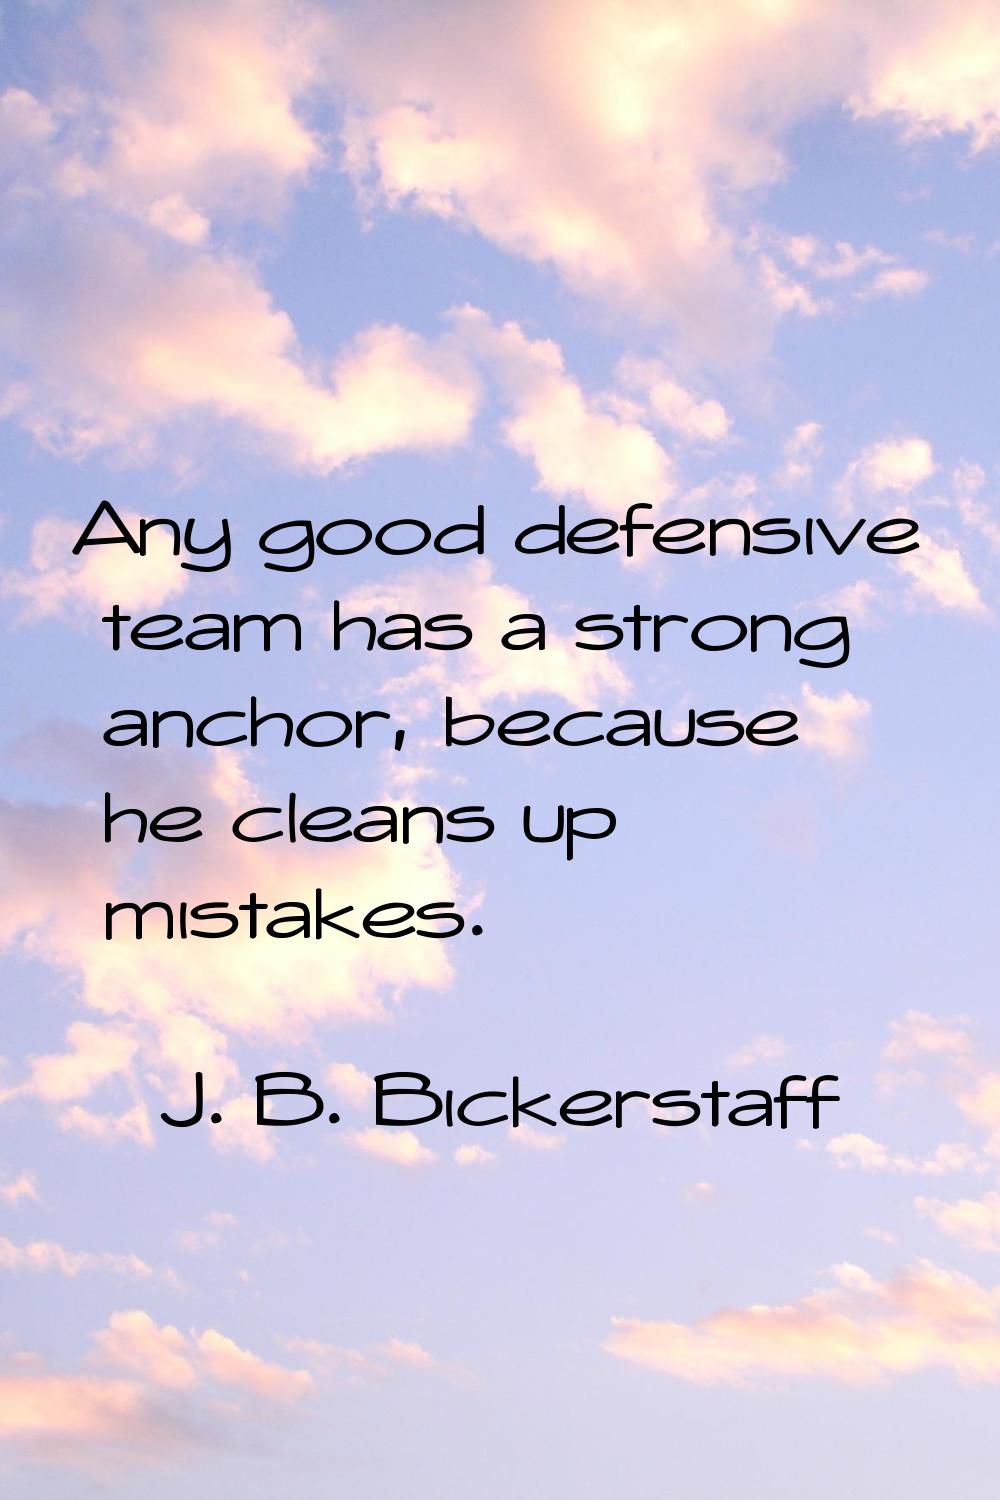 Any good defensive team has a strong anchor, because he cleans up mistakes.